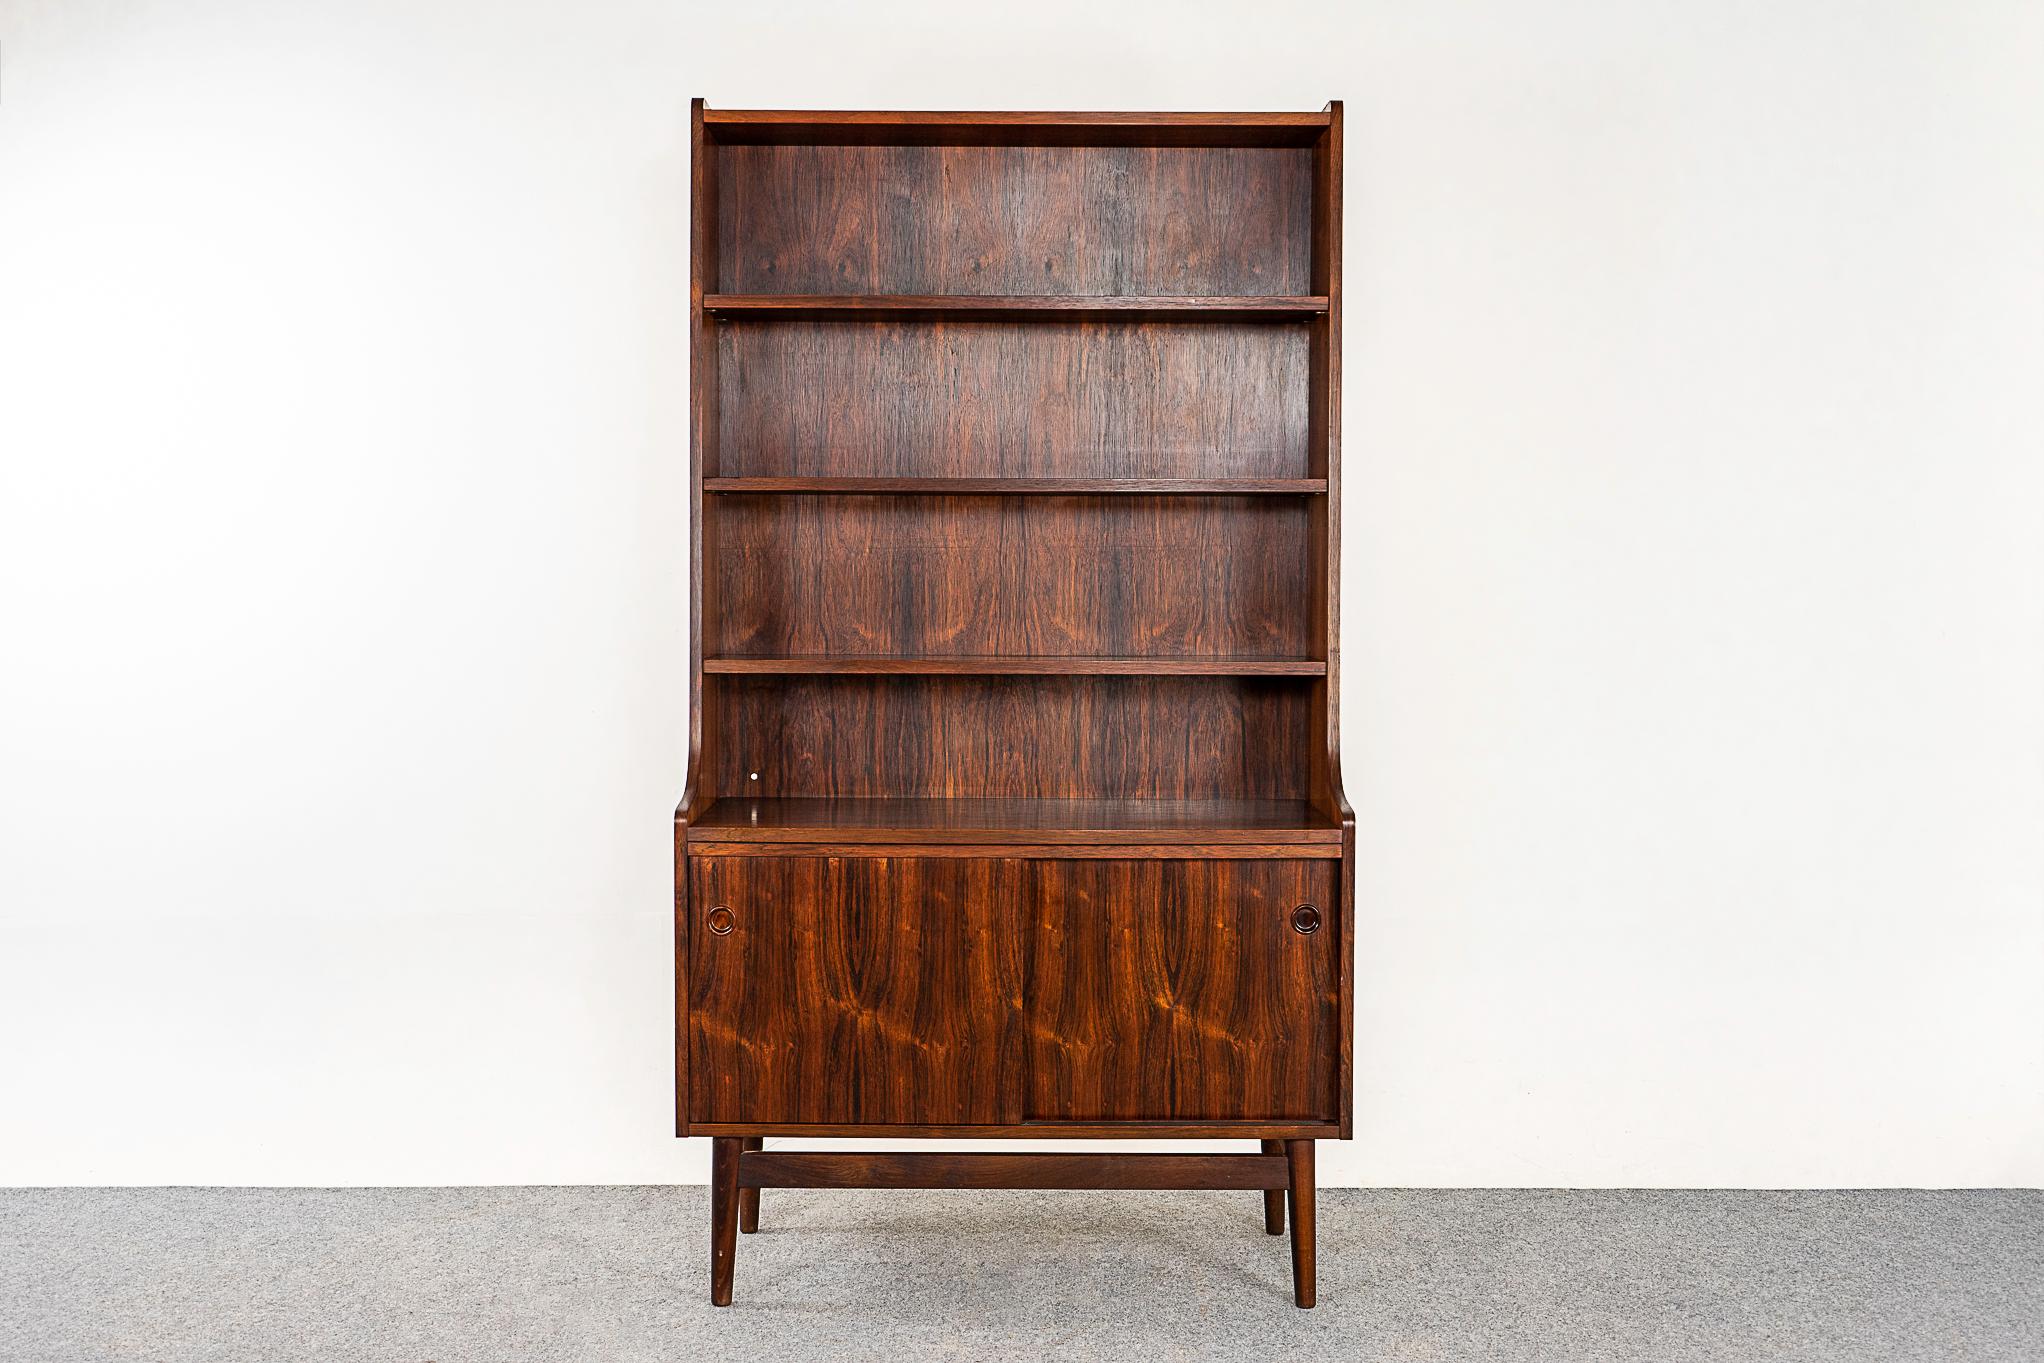 Rosewood Danish bookcase by Johannes Sorth, circa 1960's. Stunning grain patterns and beautiful tapering silhouette. Open bookshelf with 3 adjustable shelves, sliding doors reveal a shelf within. Solid wood legs with a beautiful floating effect.